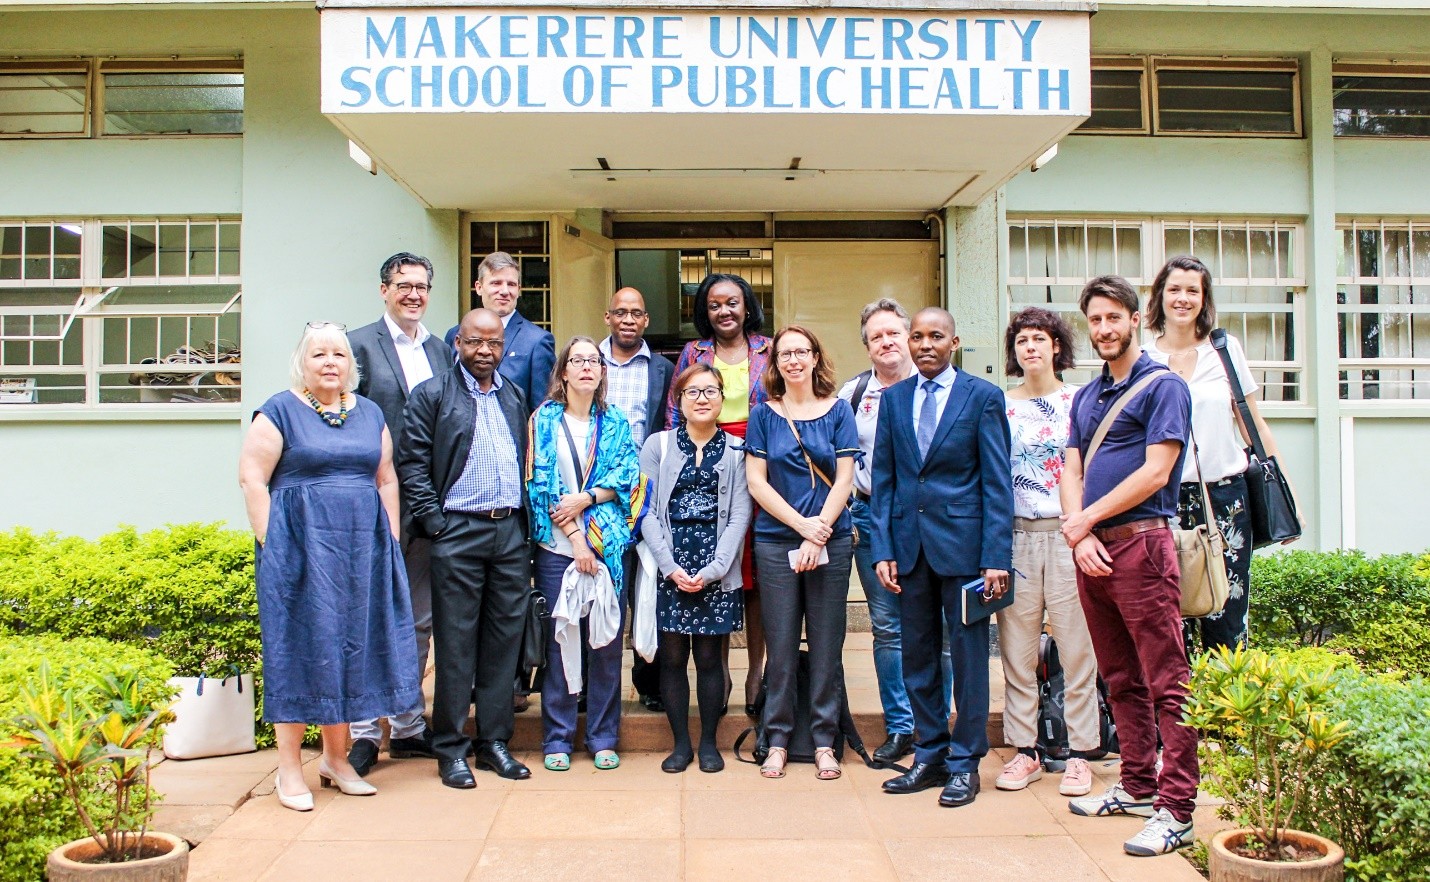 Center Back, Prof Rhoda Wanyenze, Dean, Makerere University School of Public Health and Dr. Geofrey Musinguzi (PI) in tie pose for a group photo with the consortium members at MakSPH.